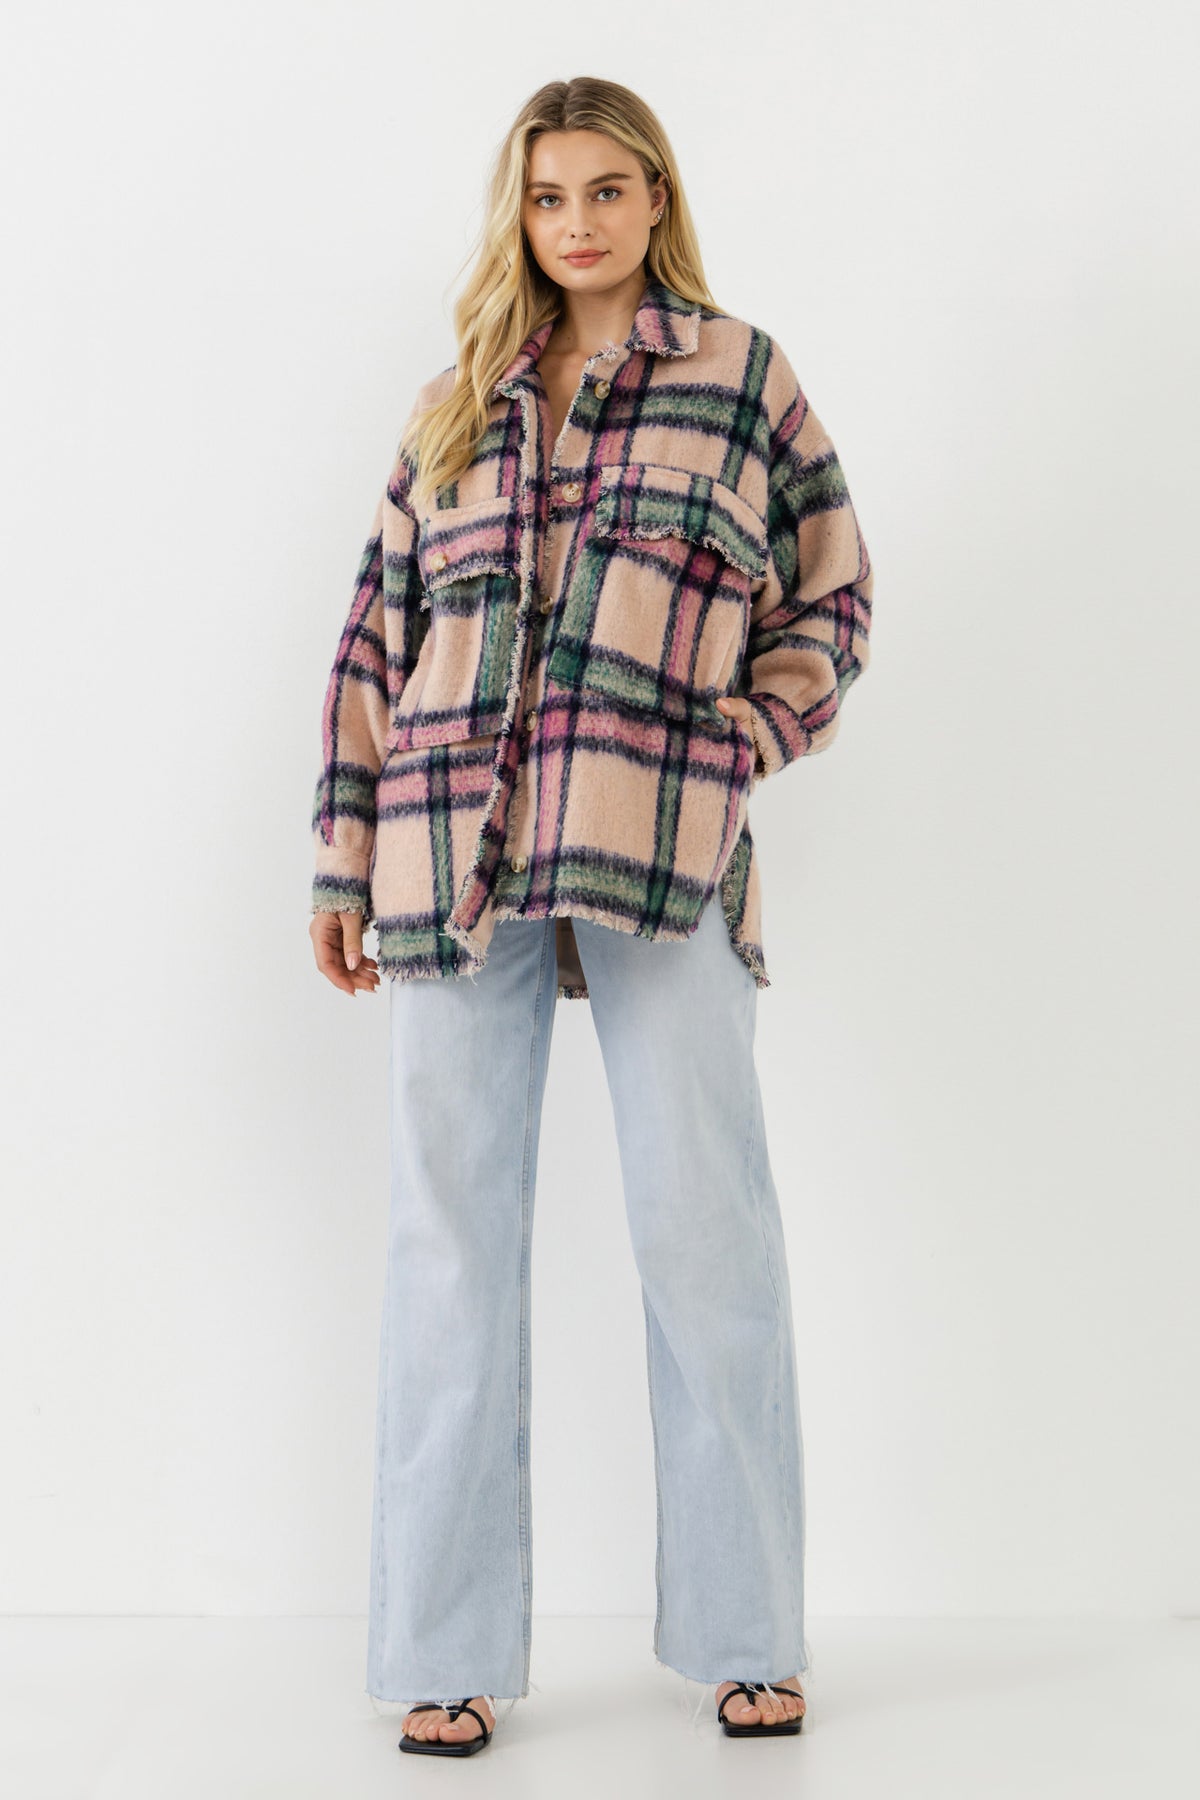 FREE THE ROSES - Oversized Plaid Coat with Raw Edges - JACKETS available at Objectrare